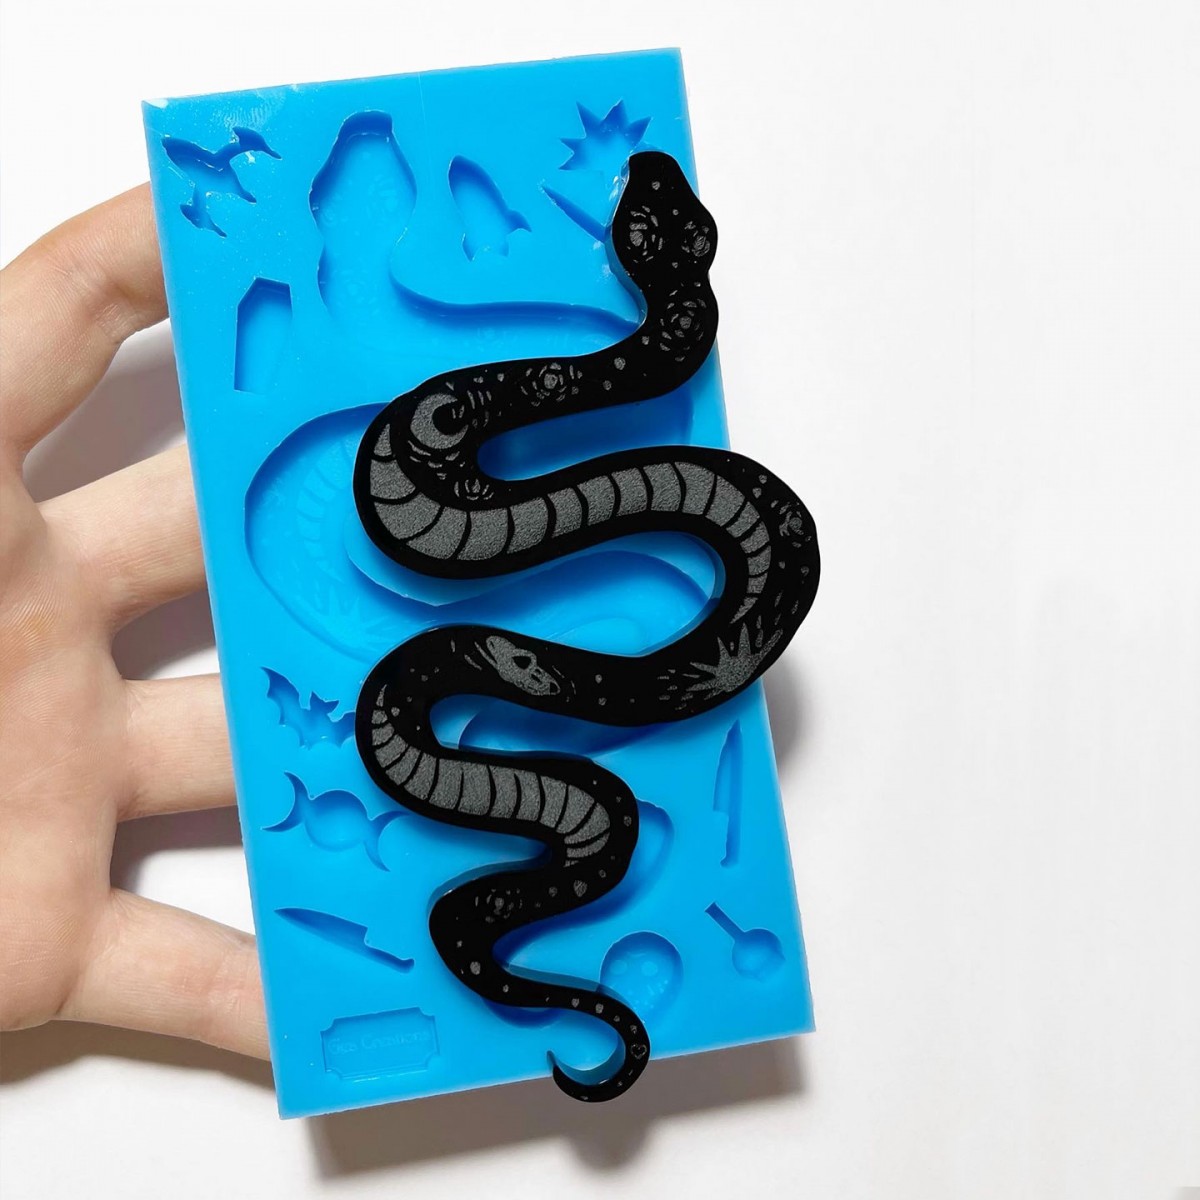 Snake soft mold designed by Angenia Creations